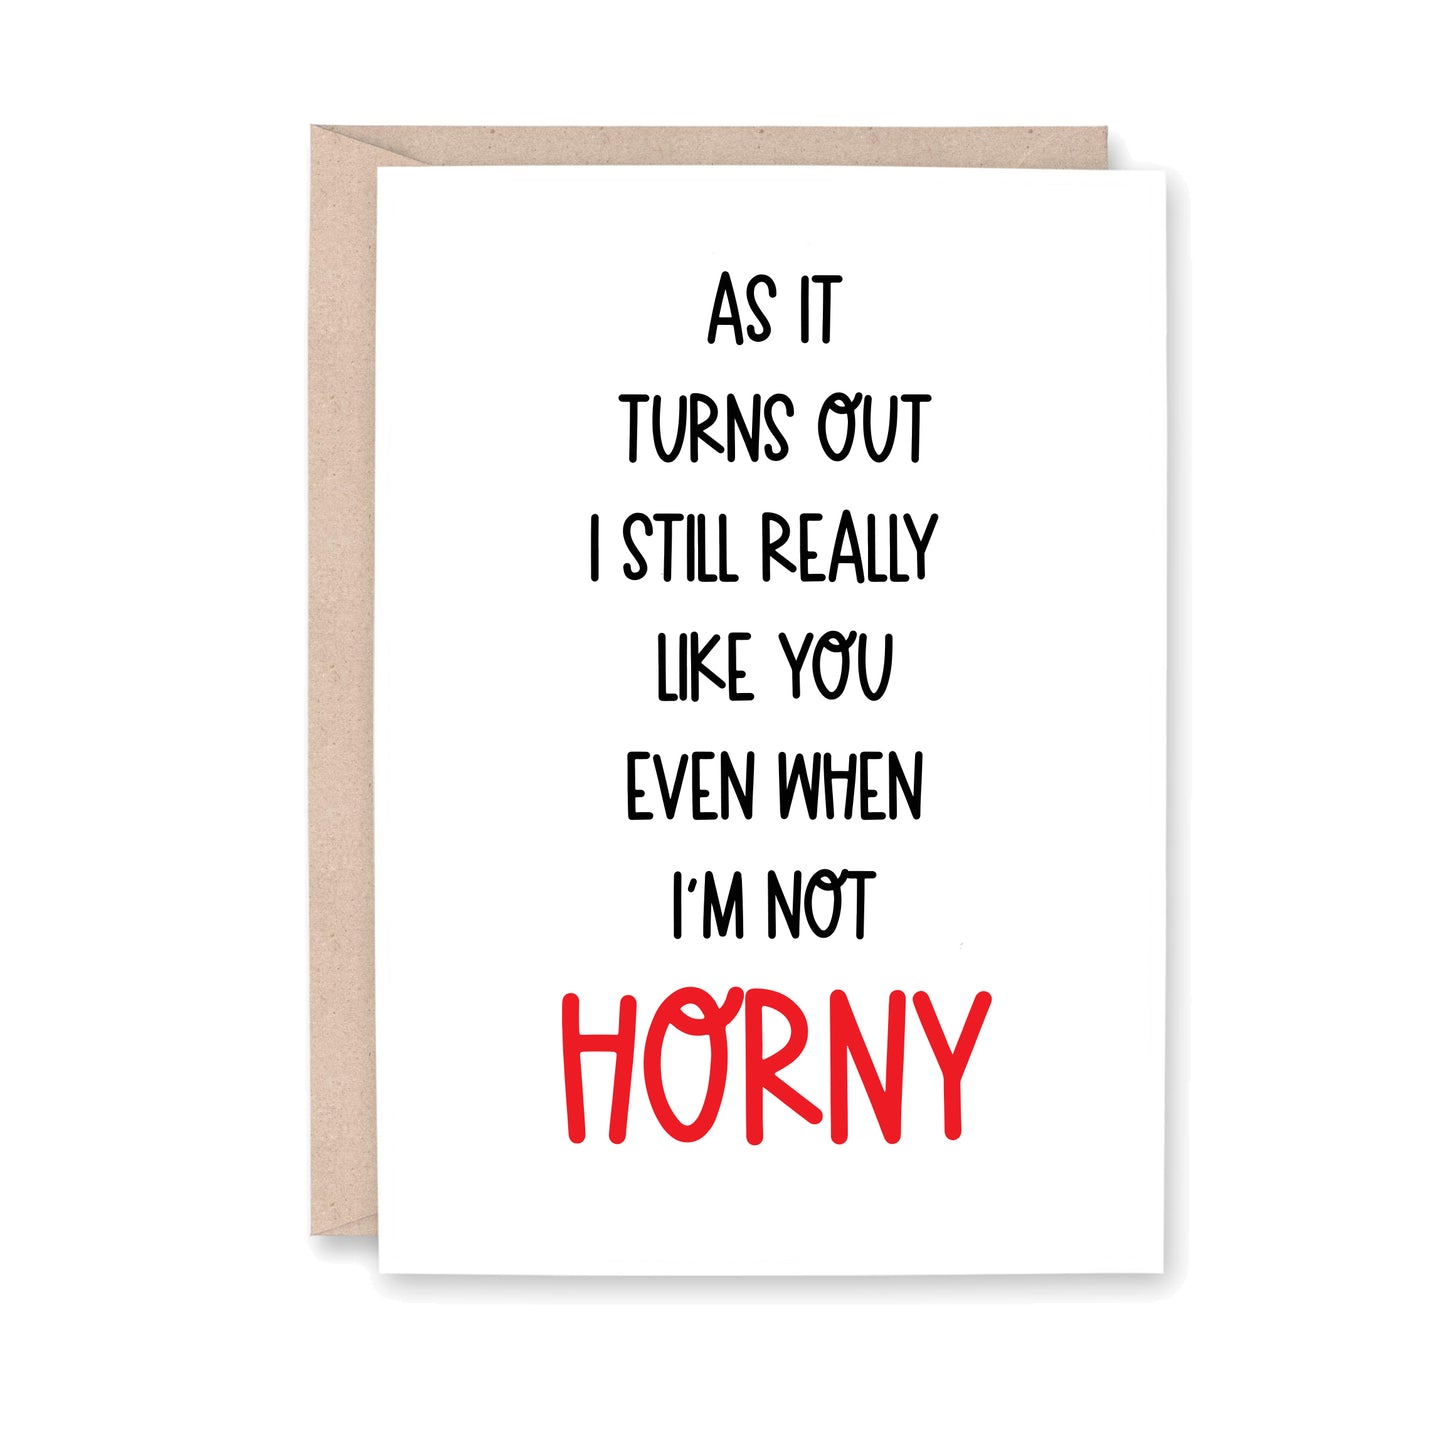 Greeting card that says, as it turns out i still really like you even when i'm not HORNY